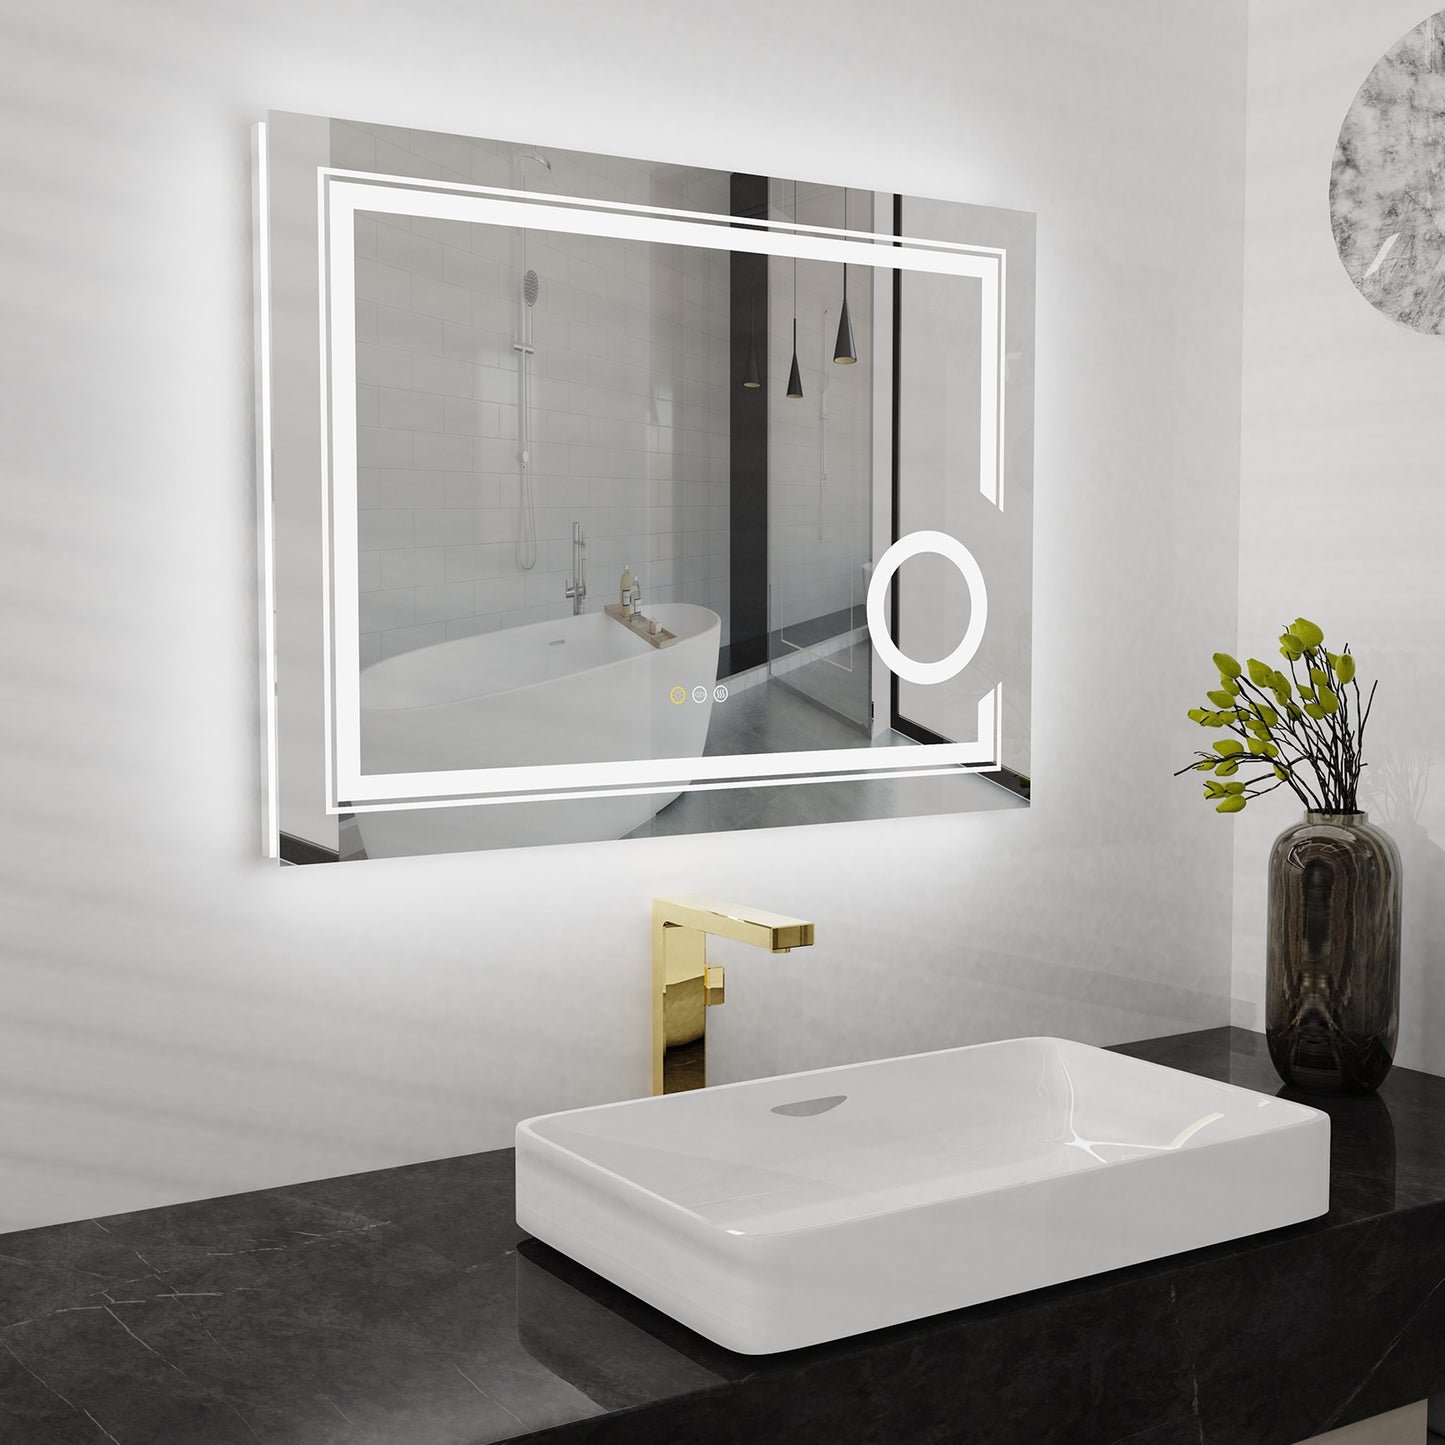 Smart Wall Vanity Mirror with 3X Magnifier